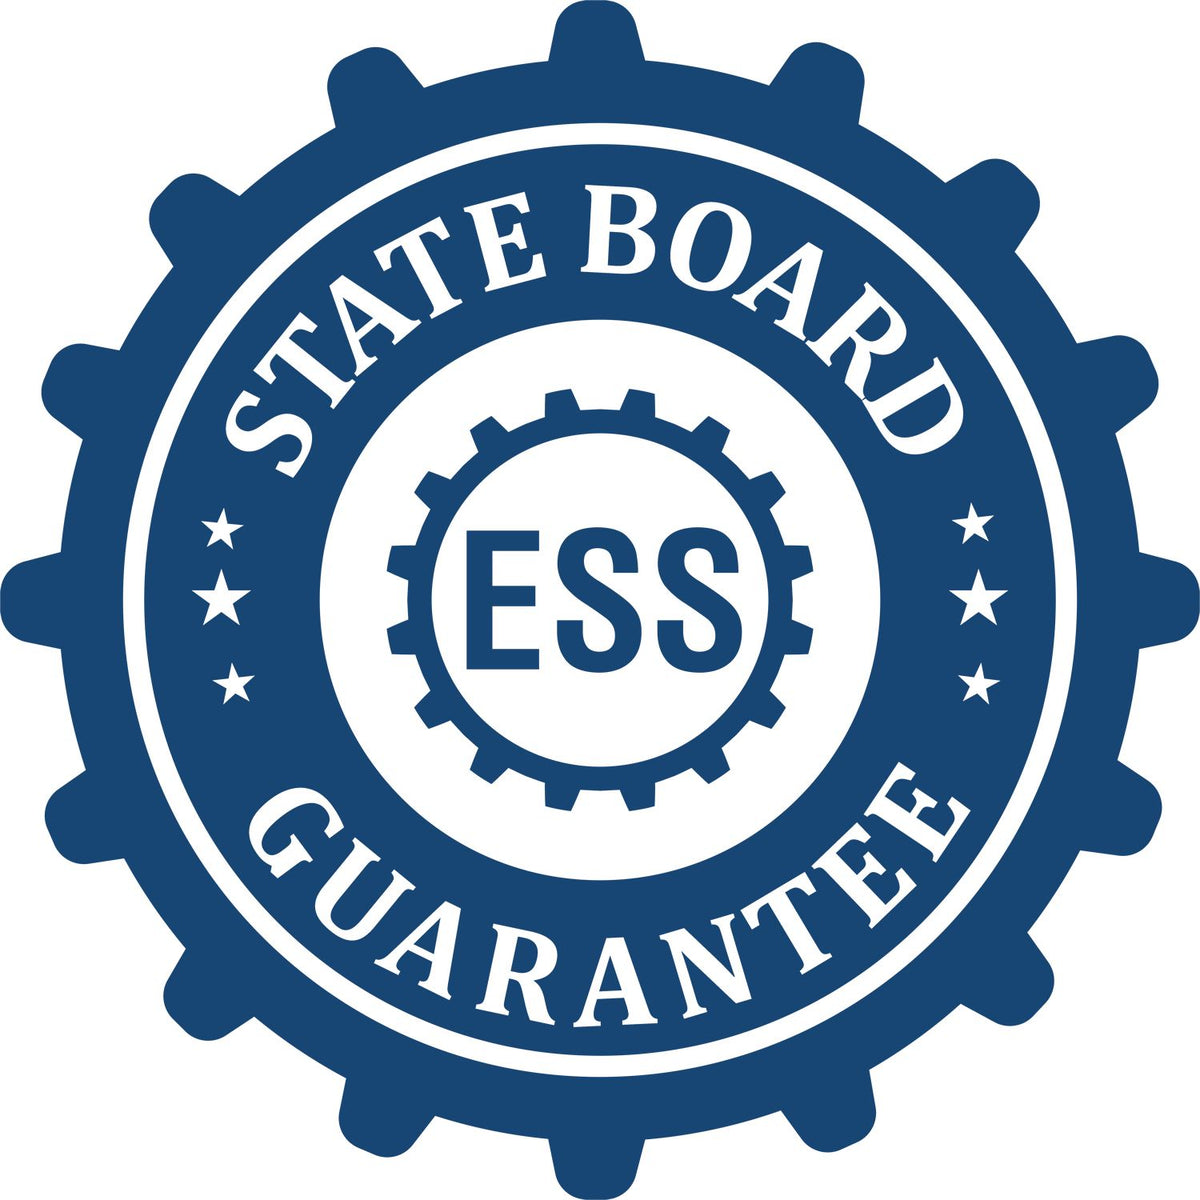 An emblem in a gear shape illustrating a state board guarantee for the Hybrid Minnesota Landscape Architect Seal